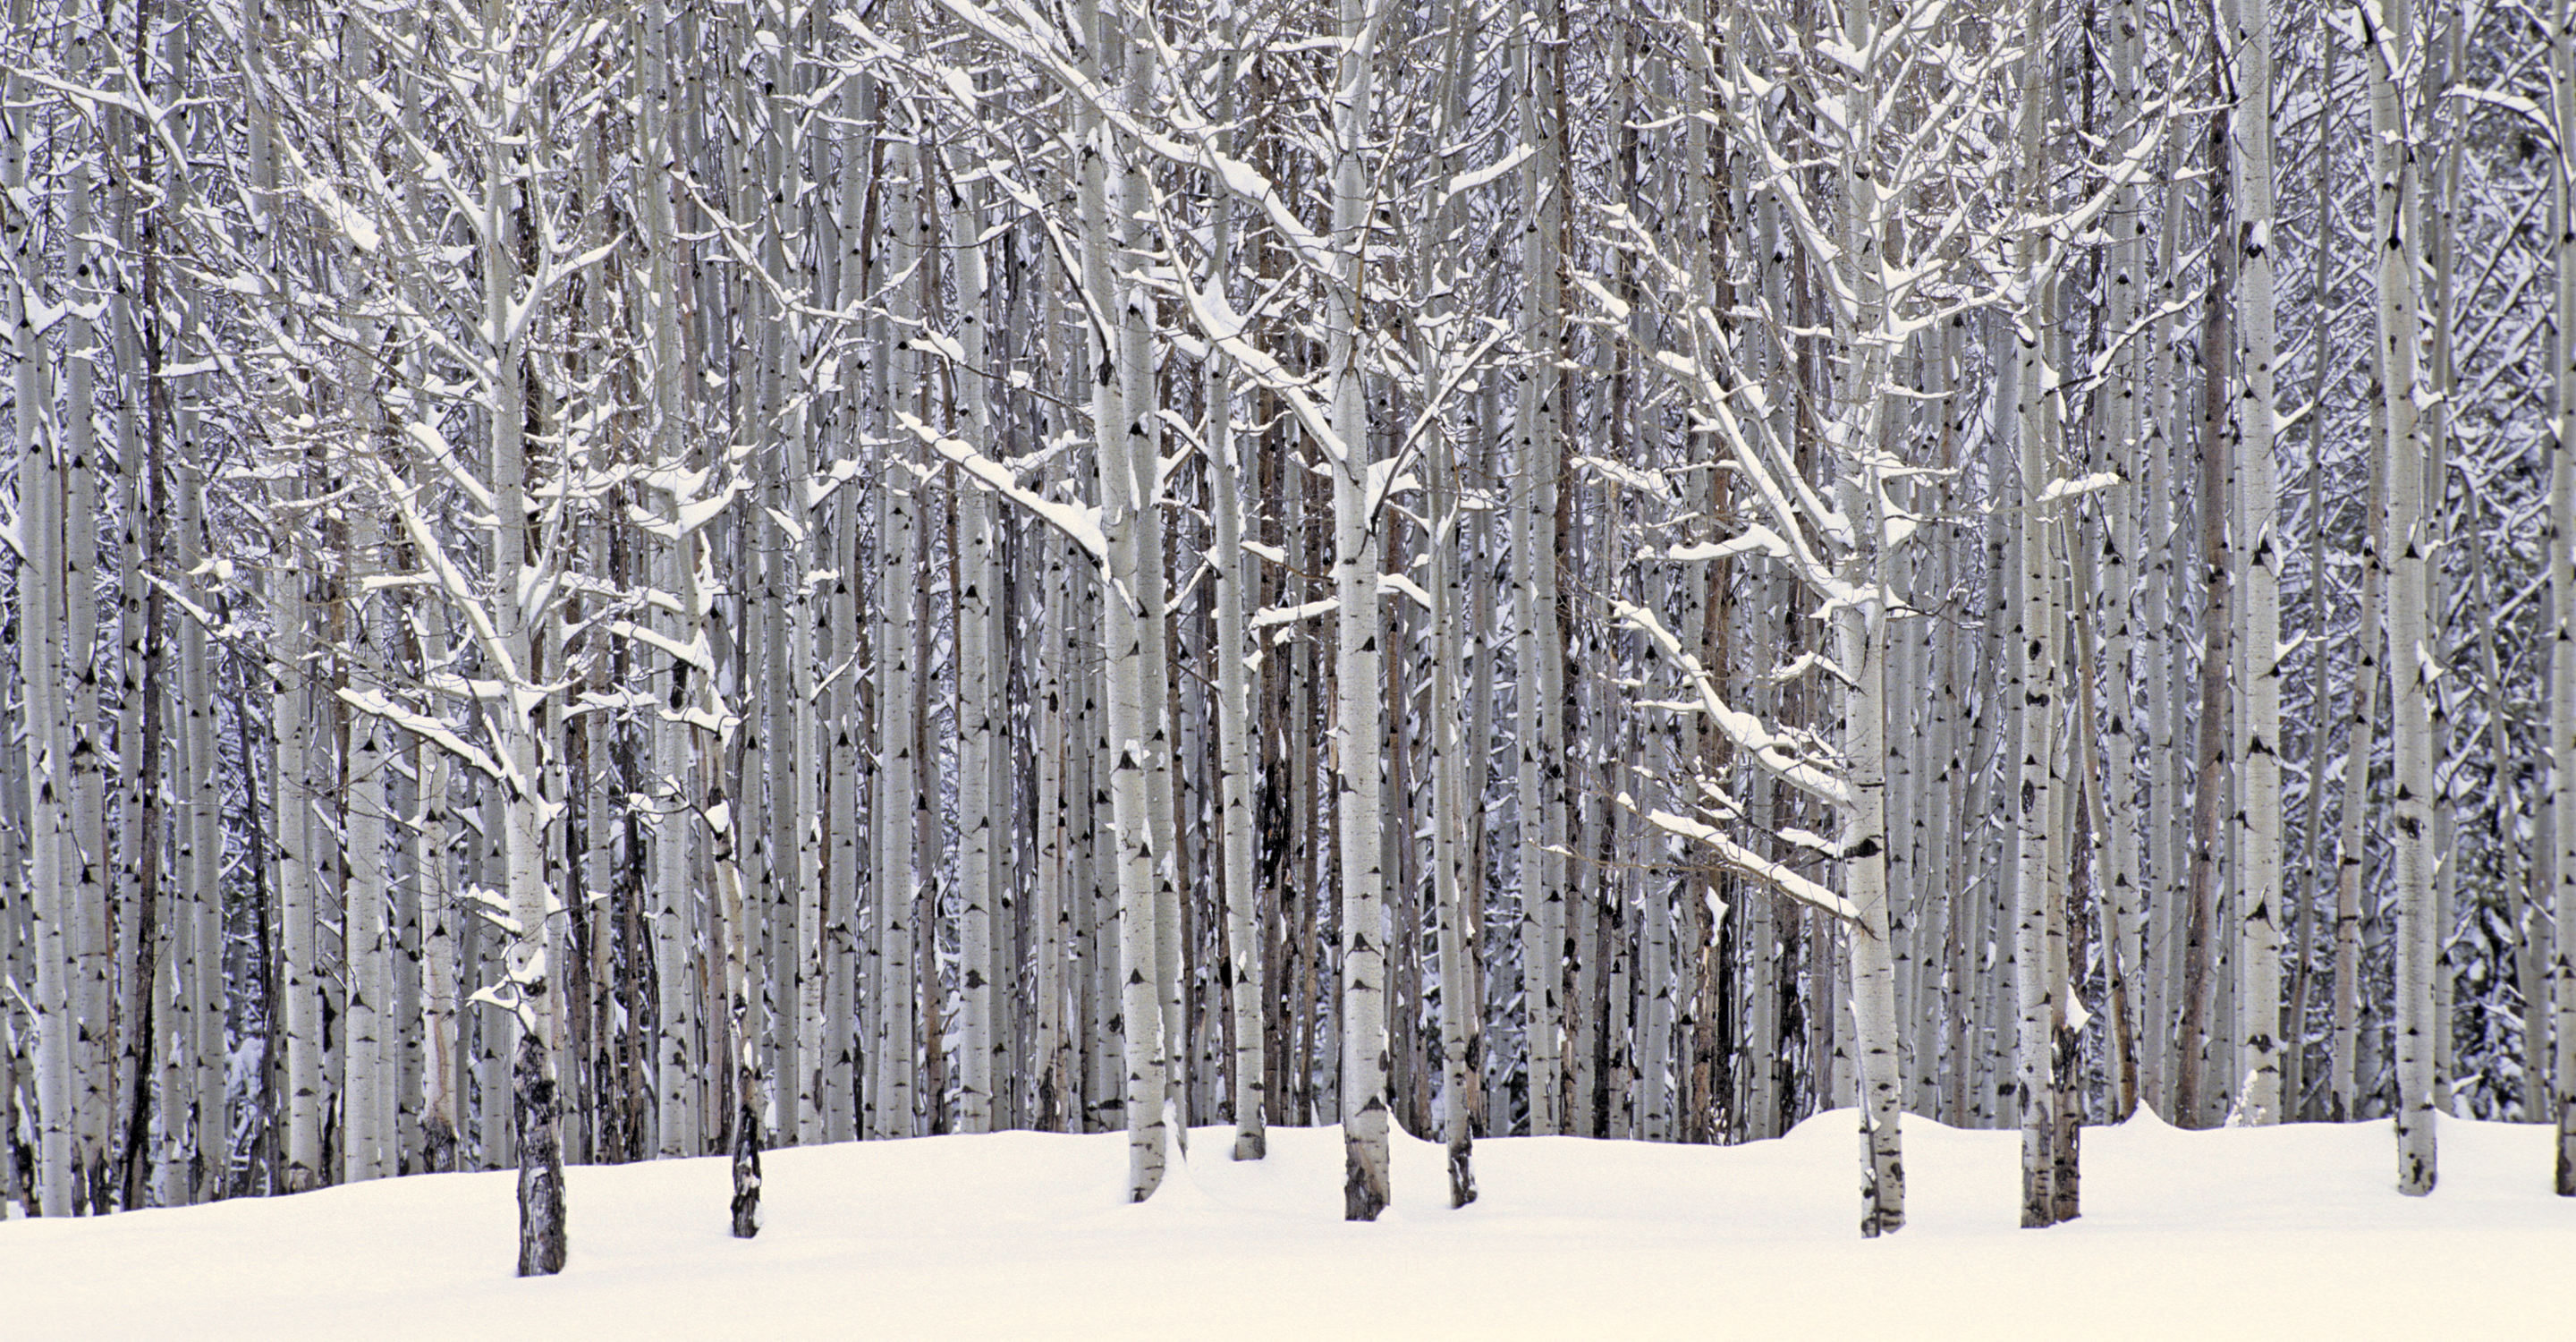 Birch trees during winter in Yellowstone National Park, United States